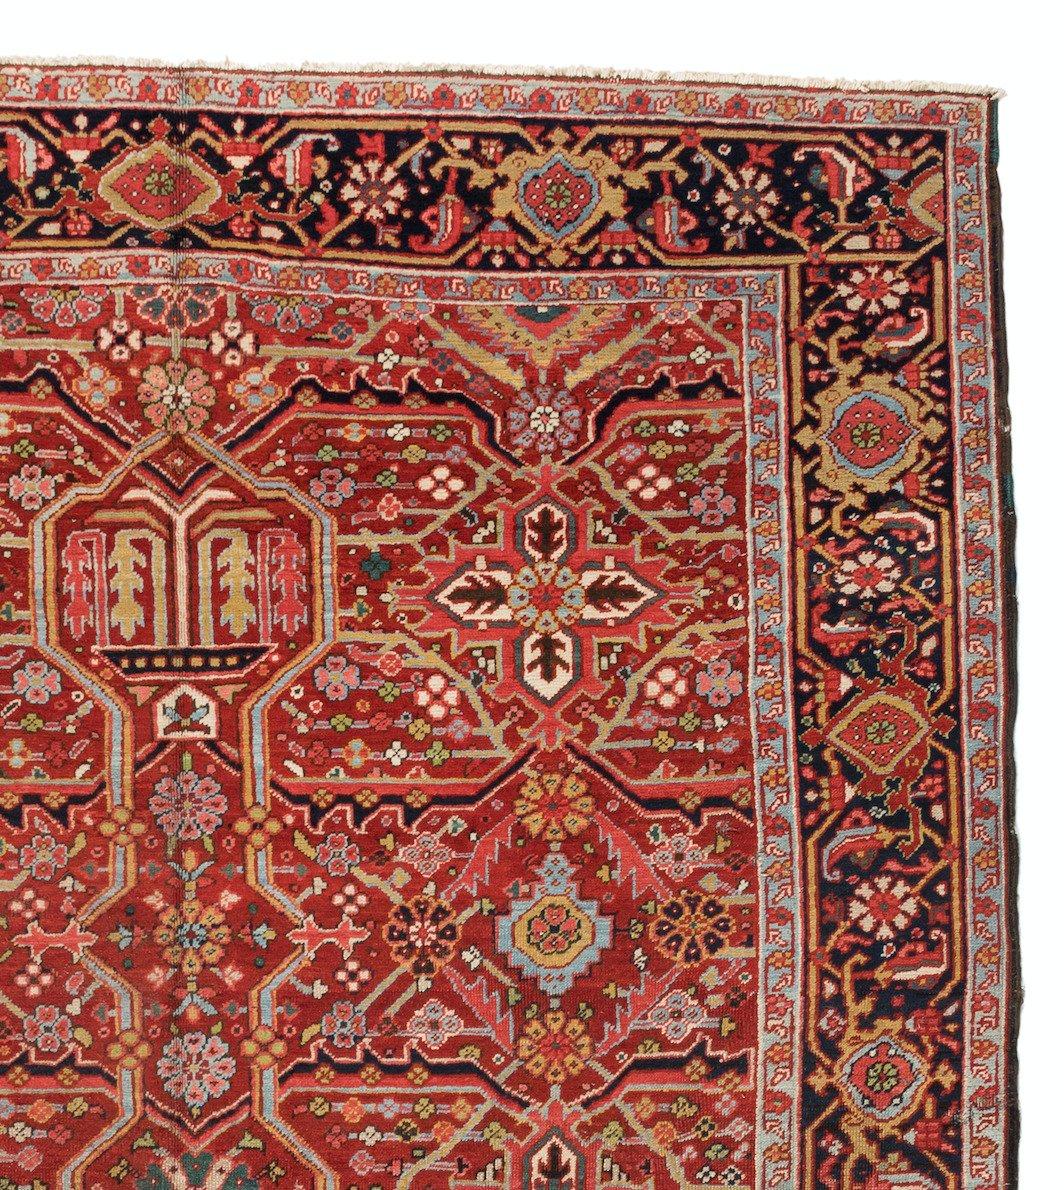 Hand-Knotted Antique Vintage Red Navy Border Tribal Persian Heriz Area Rug, circa 1920-1930s For Sale